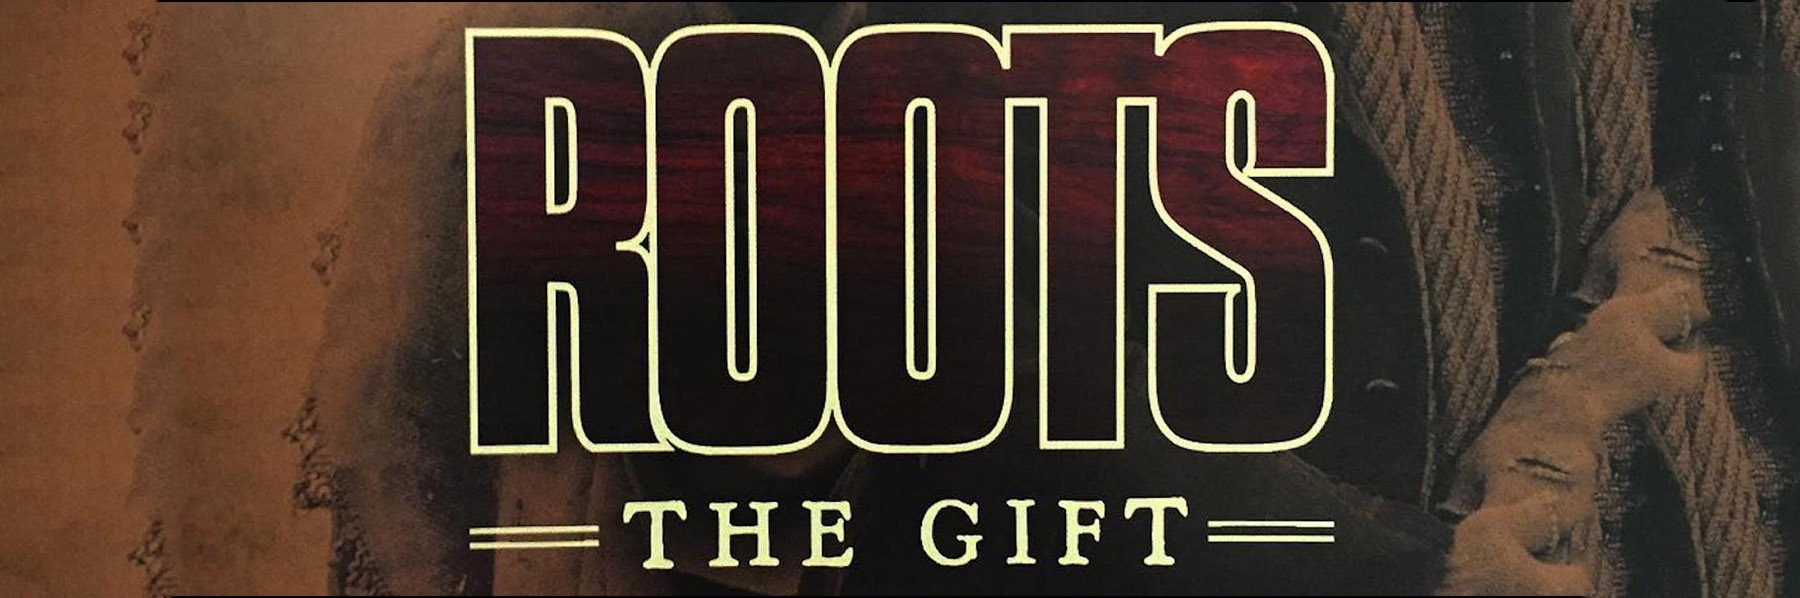 Roots: The Gift - Alex Haley